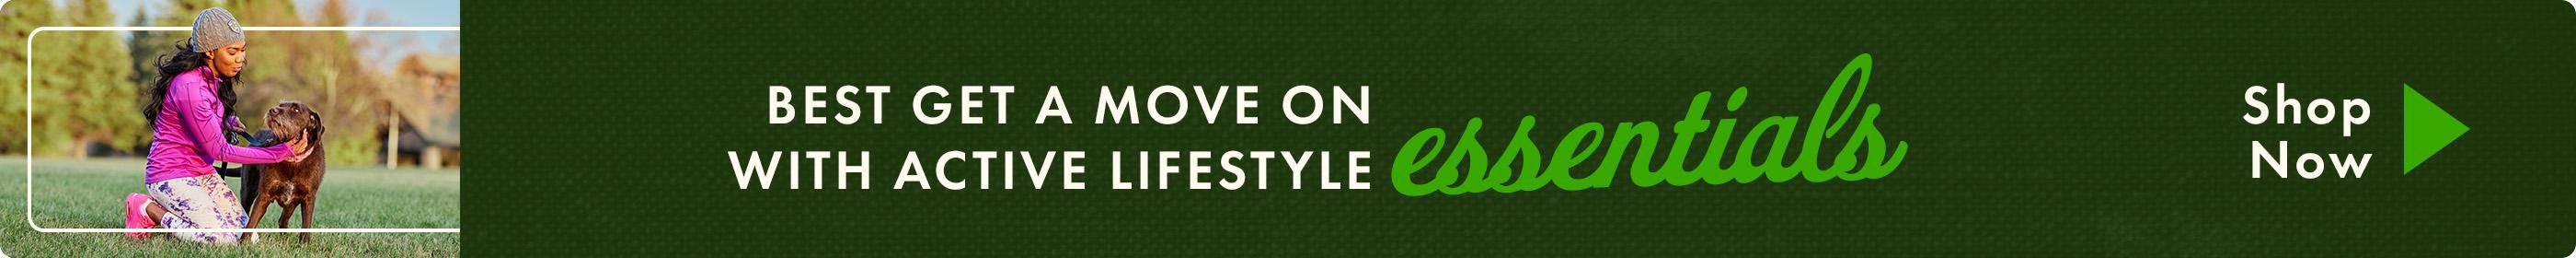 Best Get A Move On With Active Lifestyle Essentials